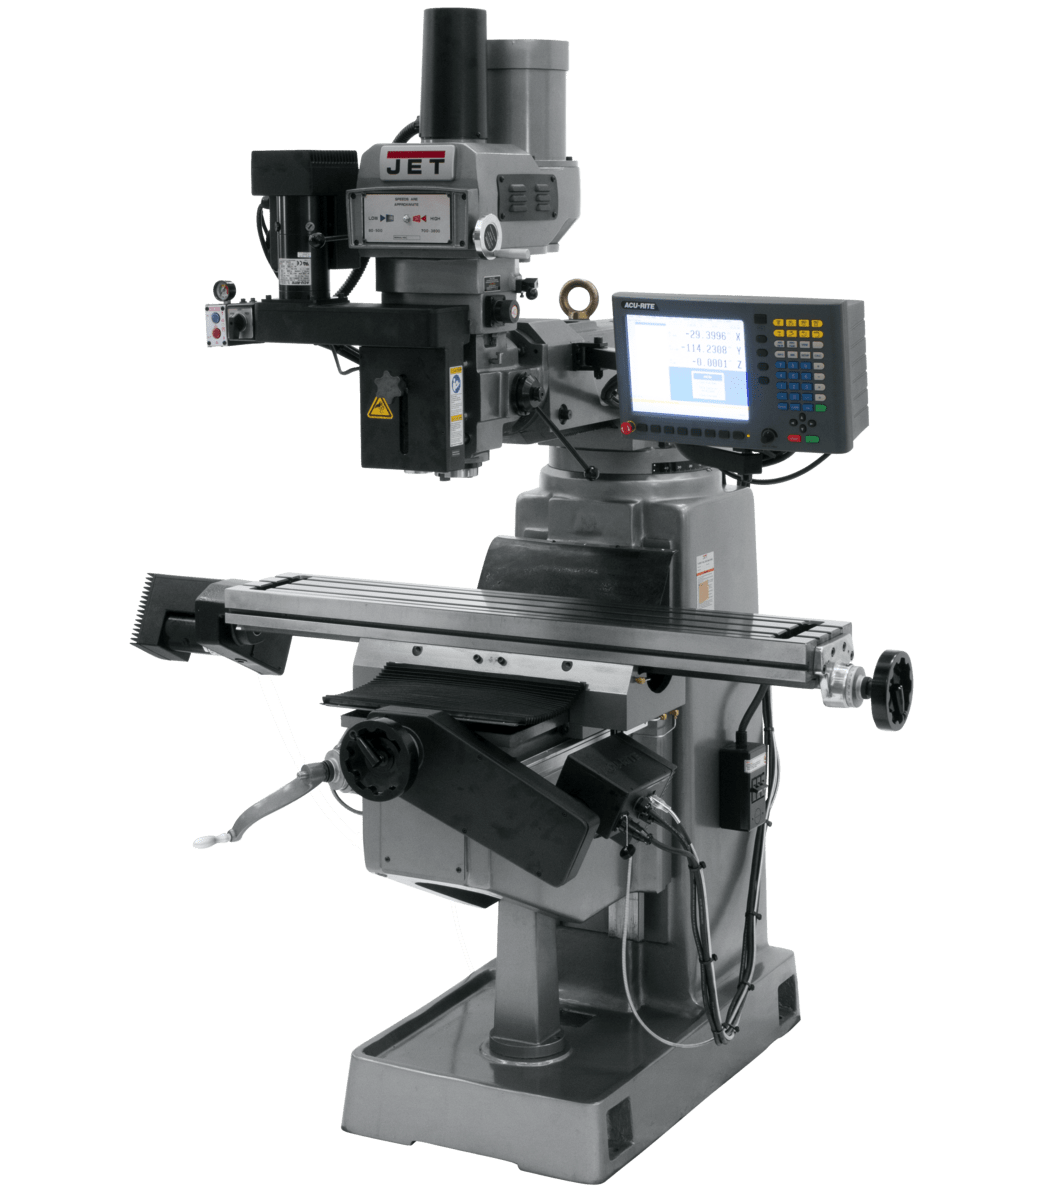 230 Mill With 3-Axis Acu-Rite MilPwr G2 CNC Controller with Air Powered Drawbar - Jet